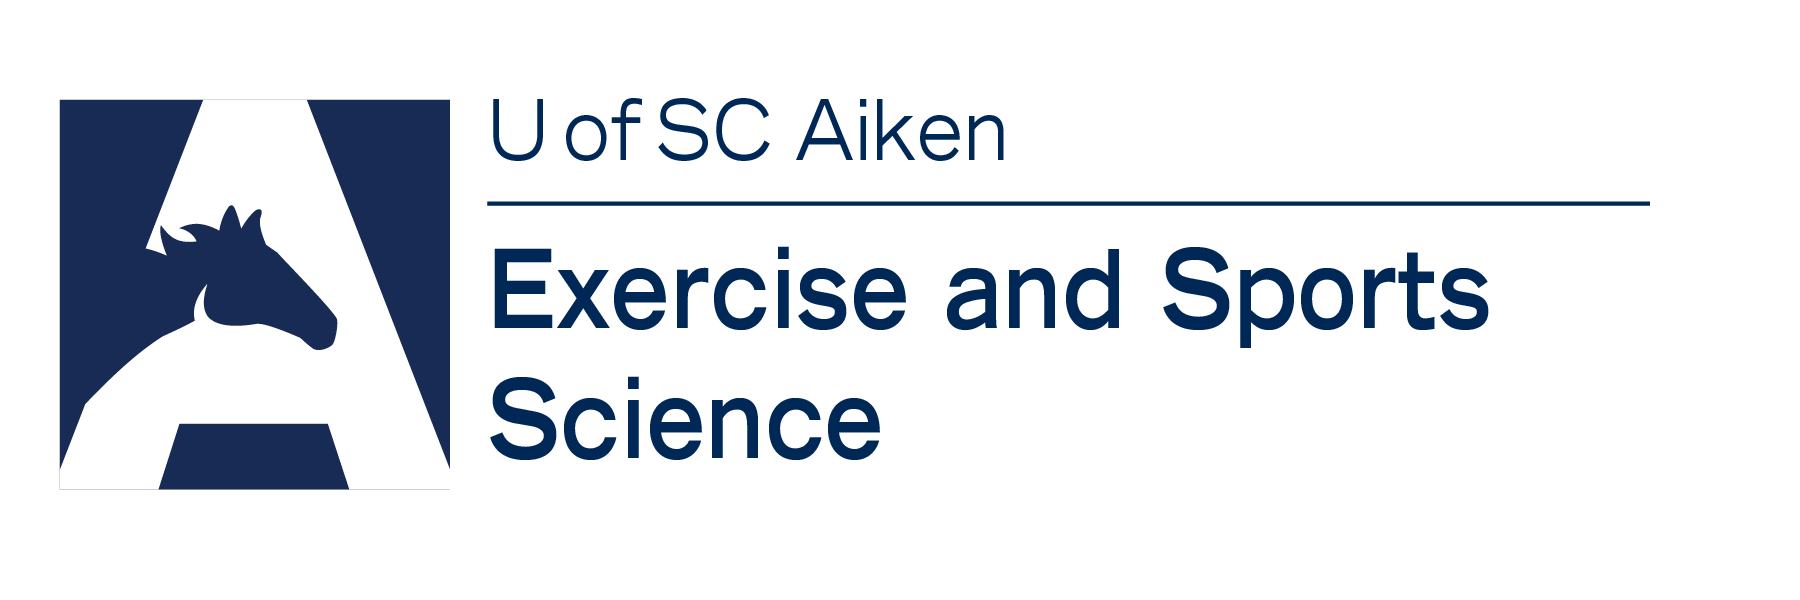 Exercise and Sports Sciences